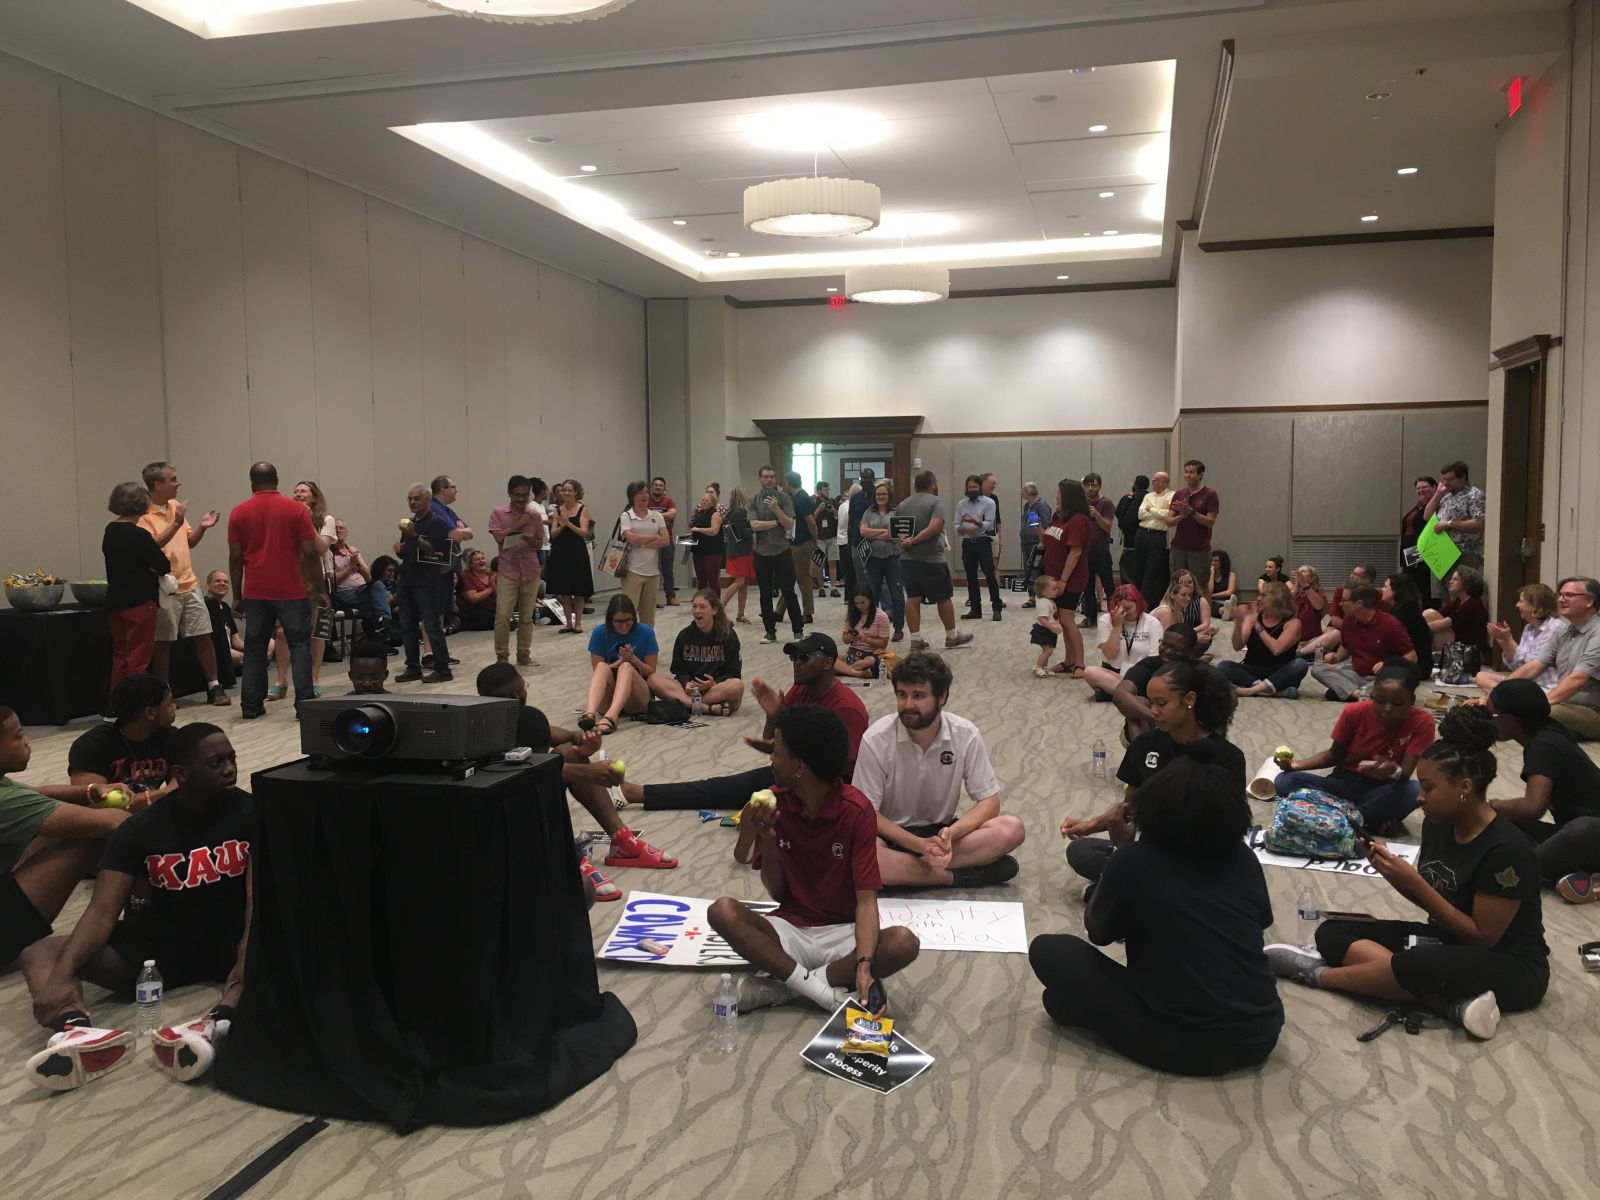 Protesters gather at the Pastides Alumni Center in advance of a contentious University of South Carolina board of trustees vote to elect Robert Caslen the school's new president. (Photo/Renee Sexton)